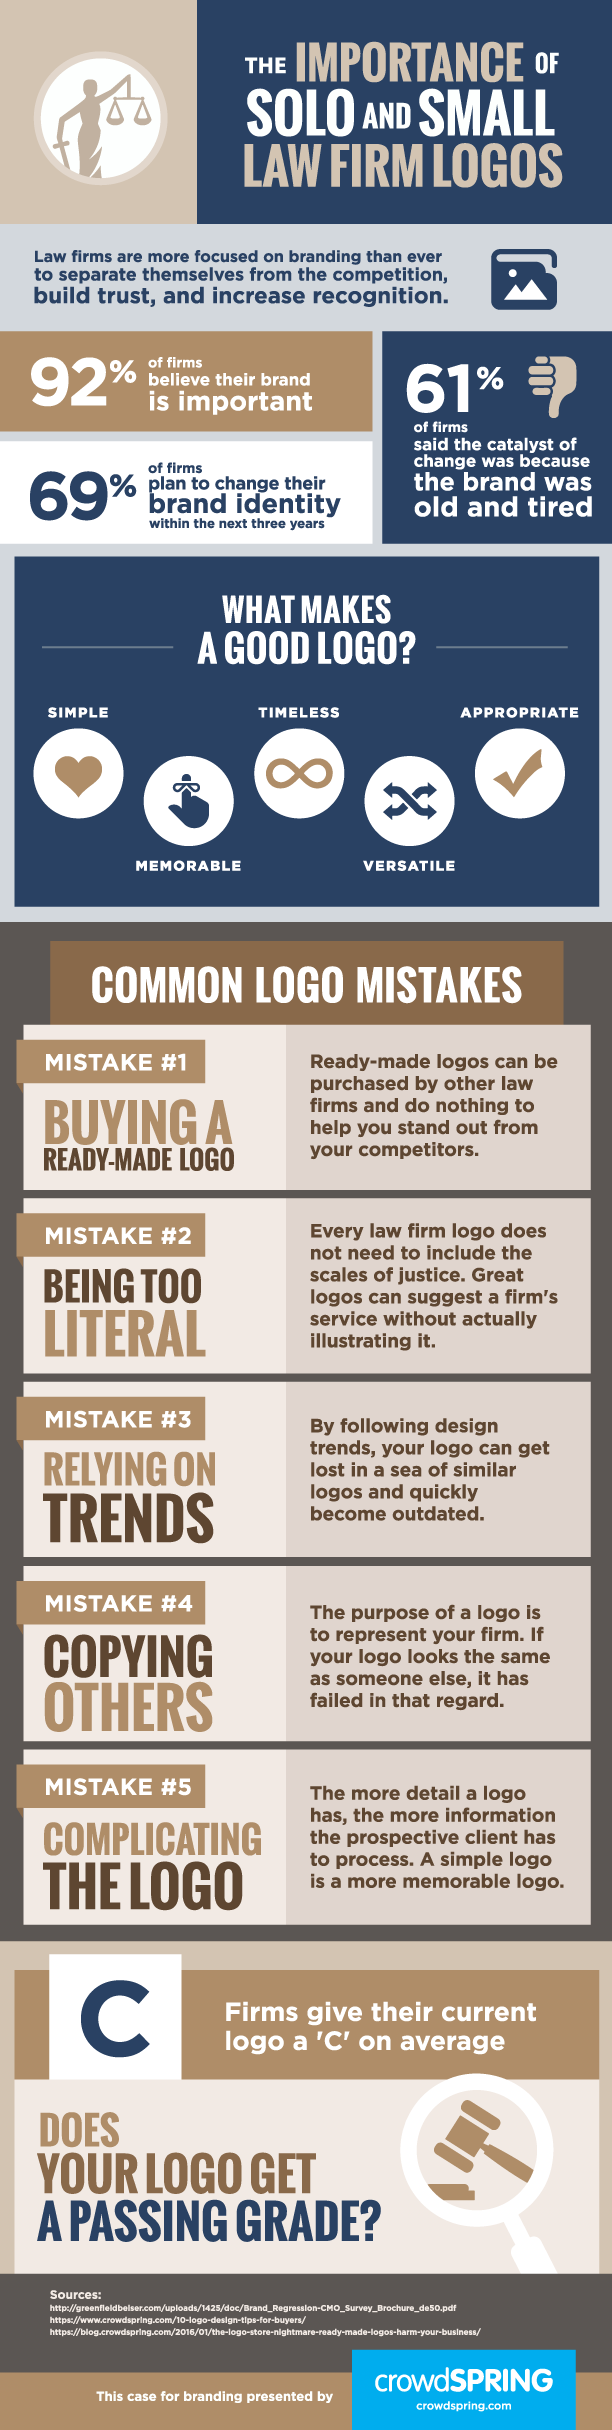 The Importance of Small Law Firm Logos by crowdSPRING